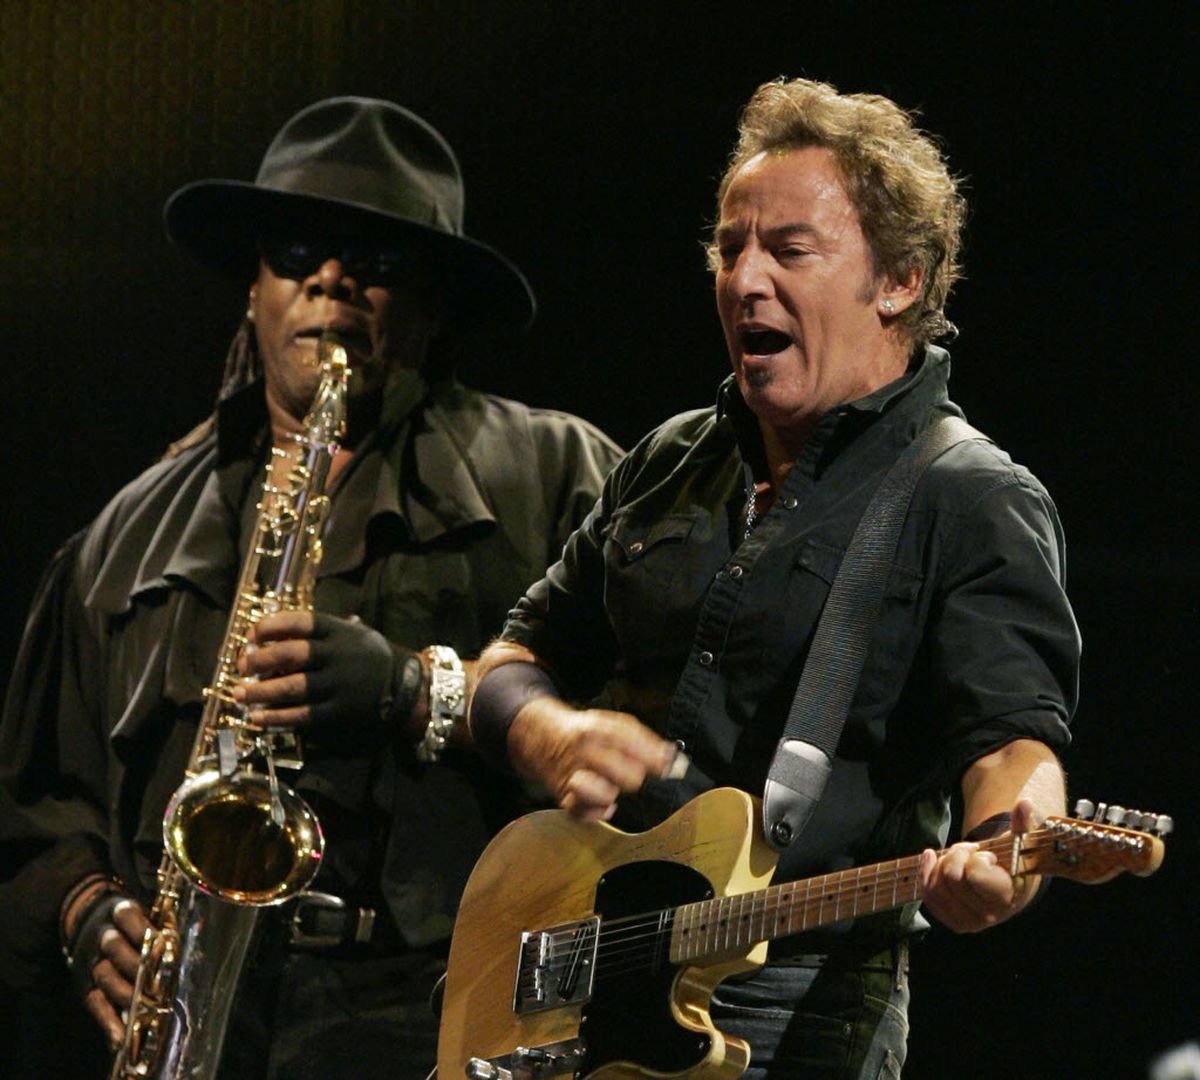 In this July 17, 2008 file photo, Bruce Springsteen, right, performs alongside Clarence Clemons on saxophone during a concert in Madrid. A spokeswoman for Bruce Springsteen and the E Street Band says saxophone player Clarence Clemons has died in Florida at age 69 on Saturday, June 18, 2011. 
  (Paul White / The Associated Press)